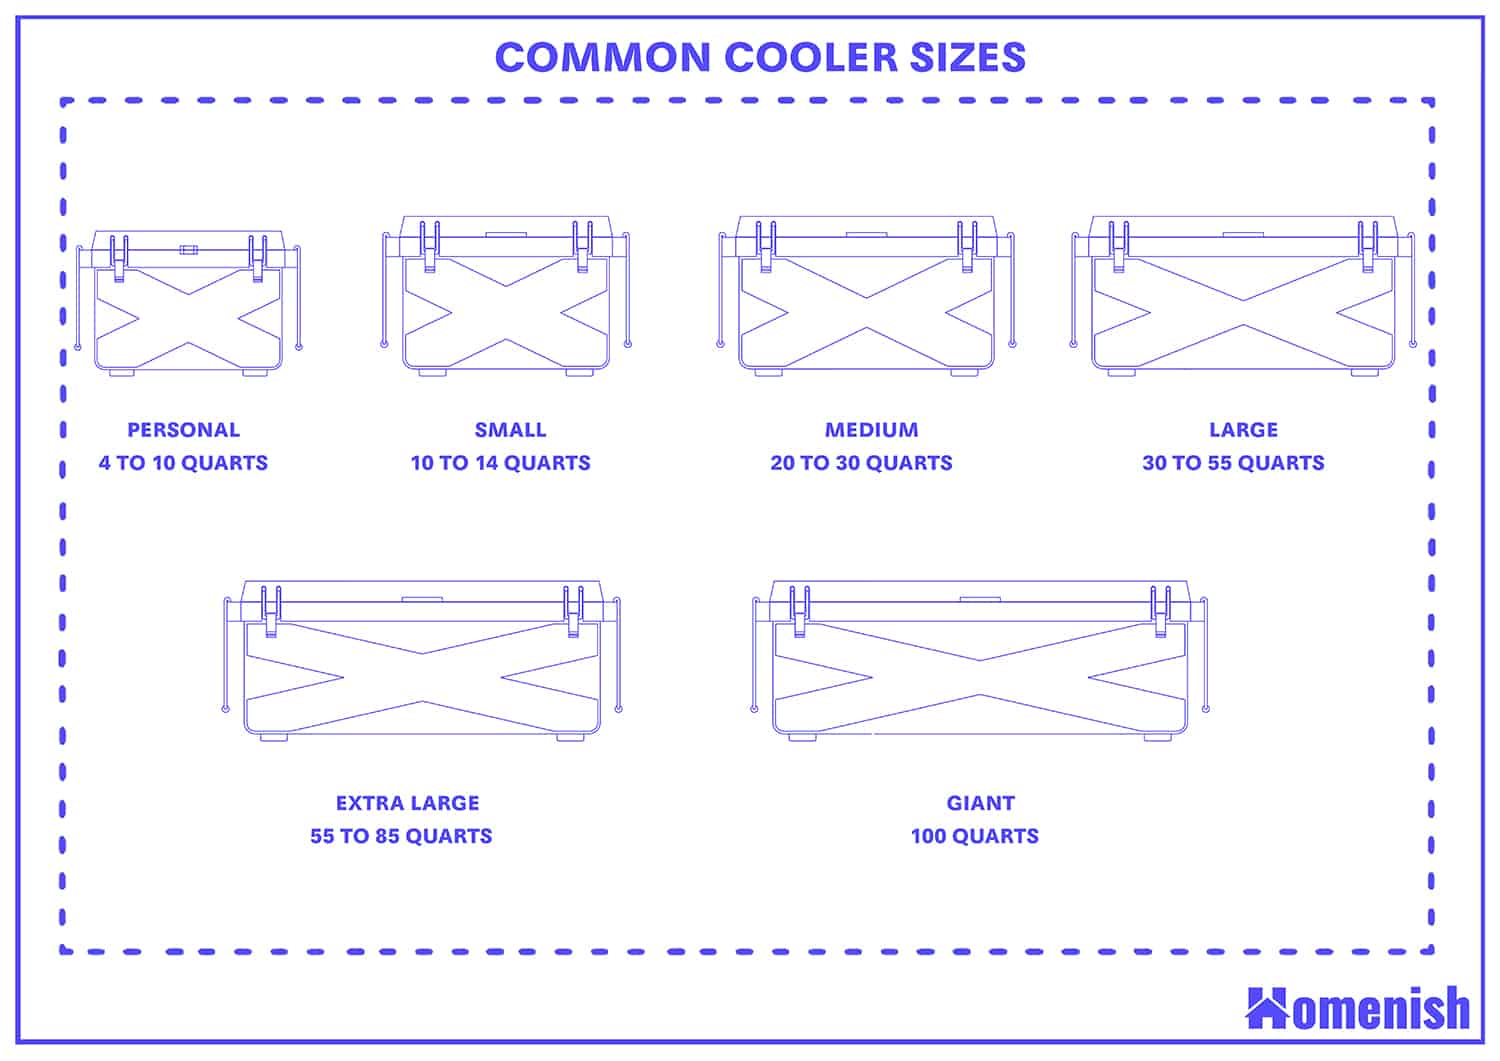 Common cooler sizes